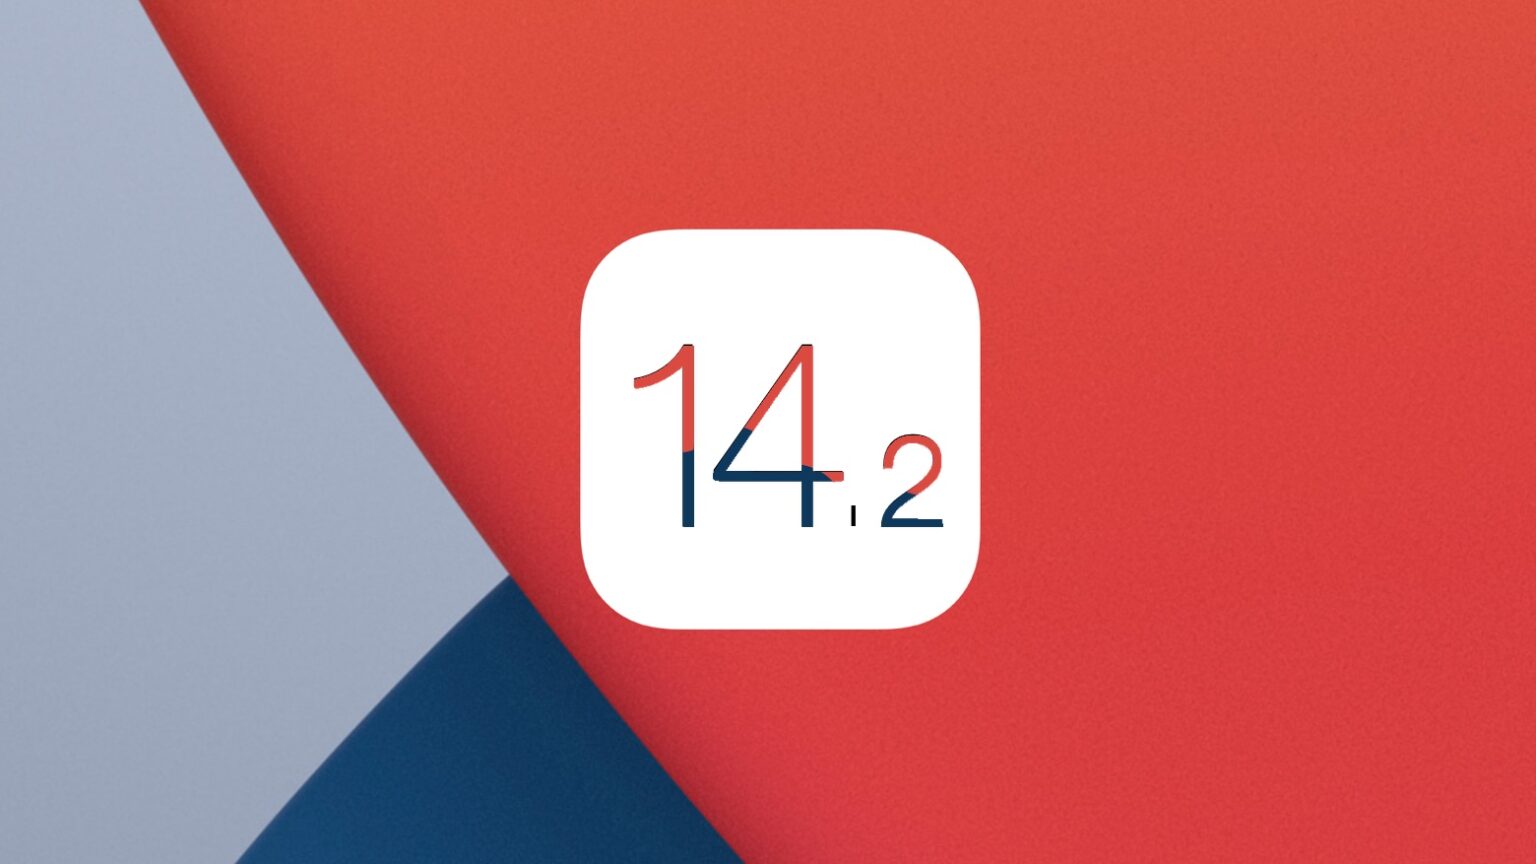 ioS 14.2 is great, but not that great.